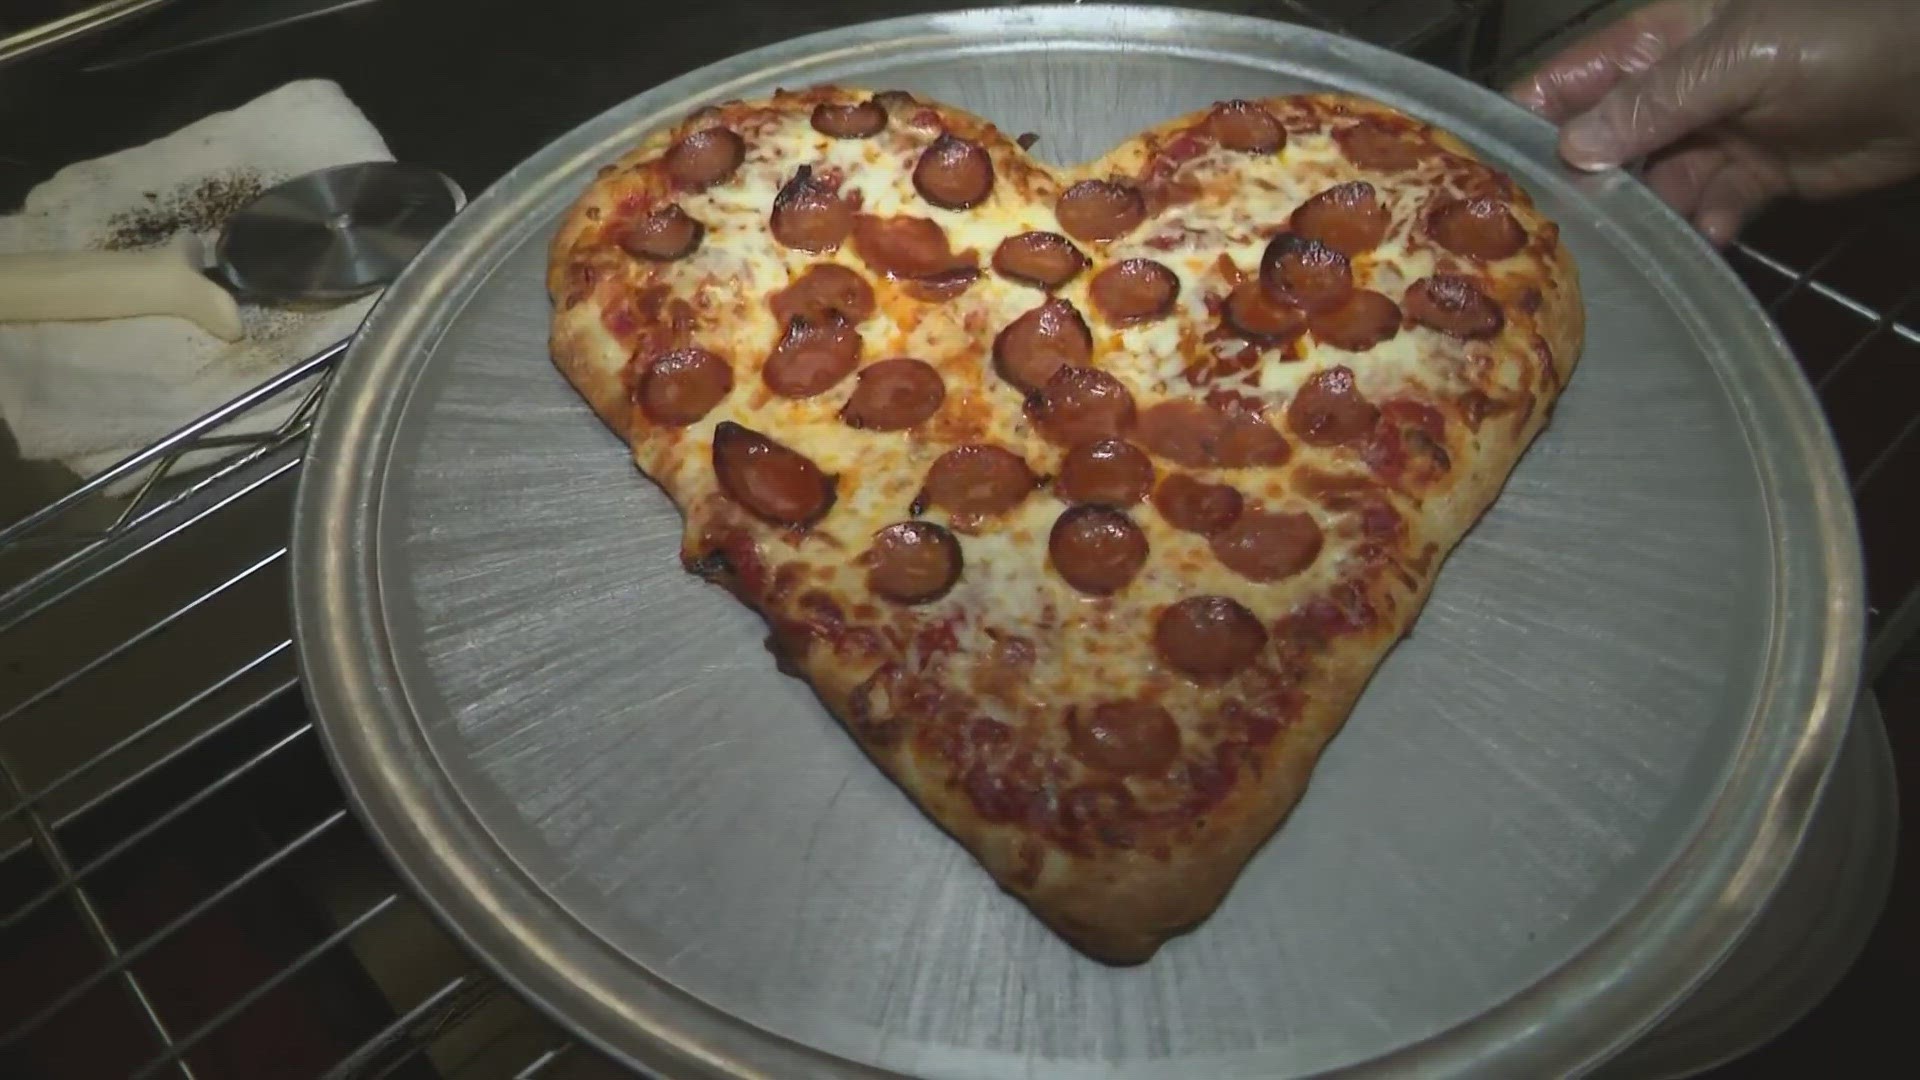 Looking for a unique dinner idea for Valentine's Day? How about a heart-shaped pizza from Geraci's Slice Shop in Cleveland?